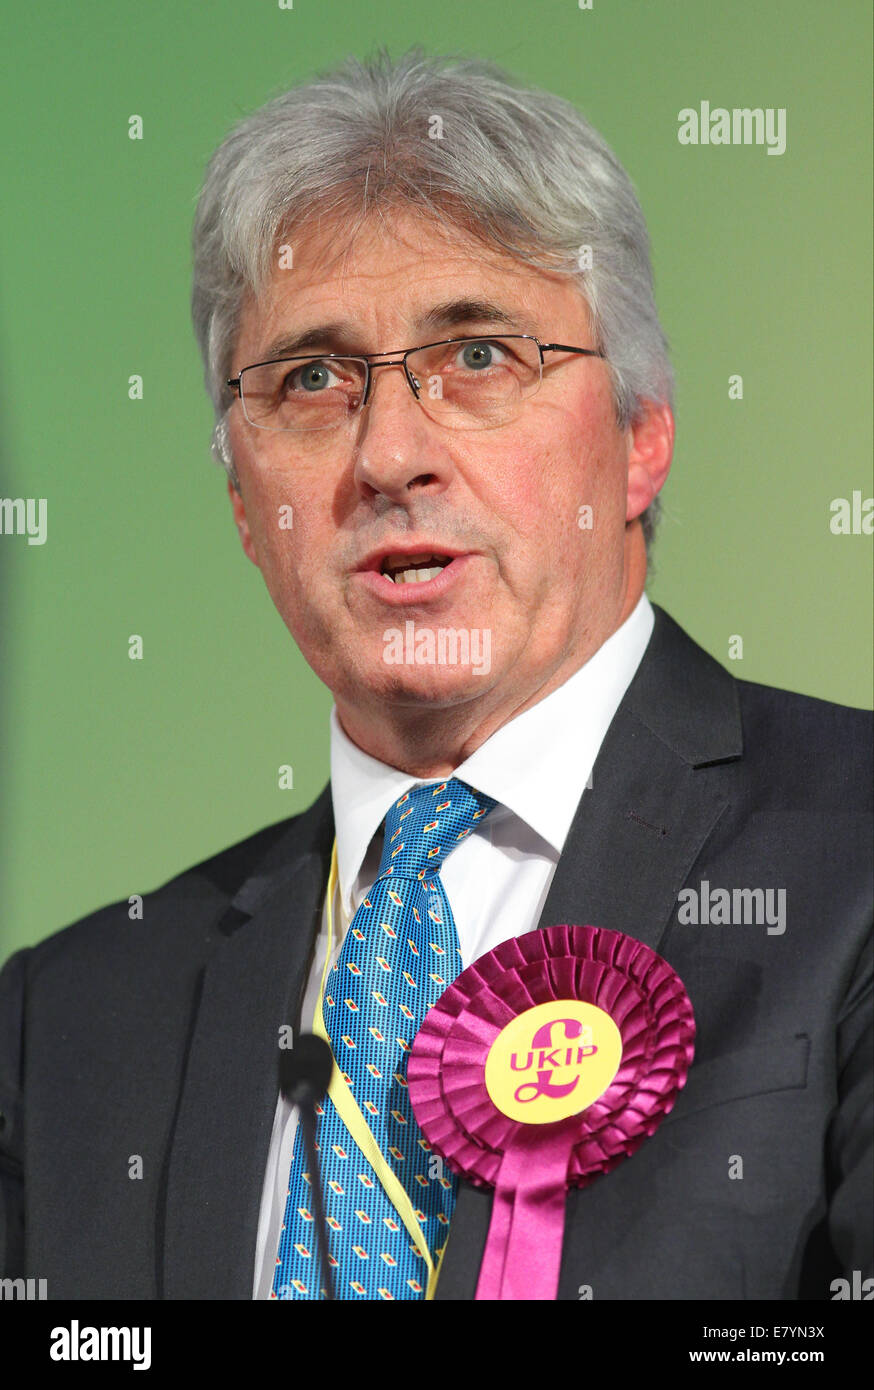 JOHN BICKLEY UK INDEPENDENCE PARTY 26 September 2014 DONCASTER RACECOURSE DONCASTER YORKSHIRE ENGLAND Stock Photo